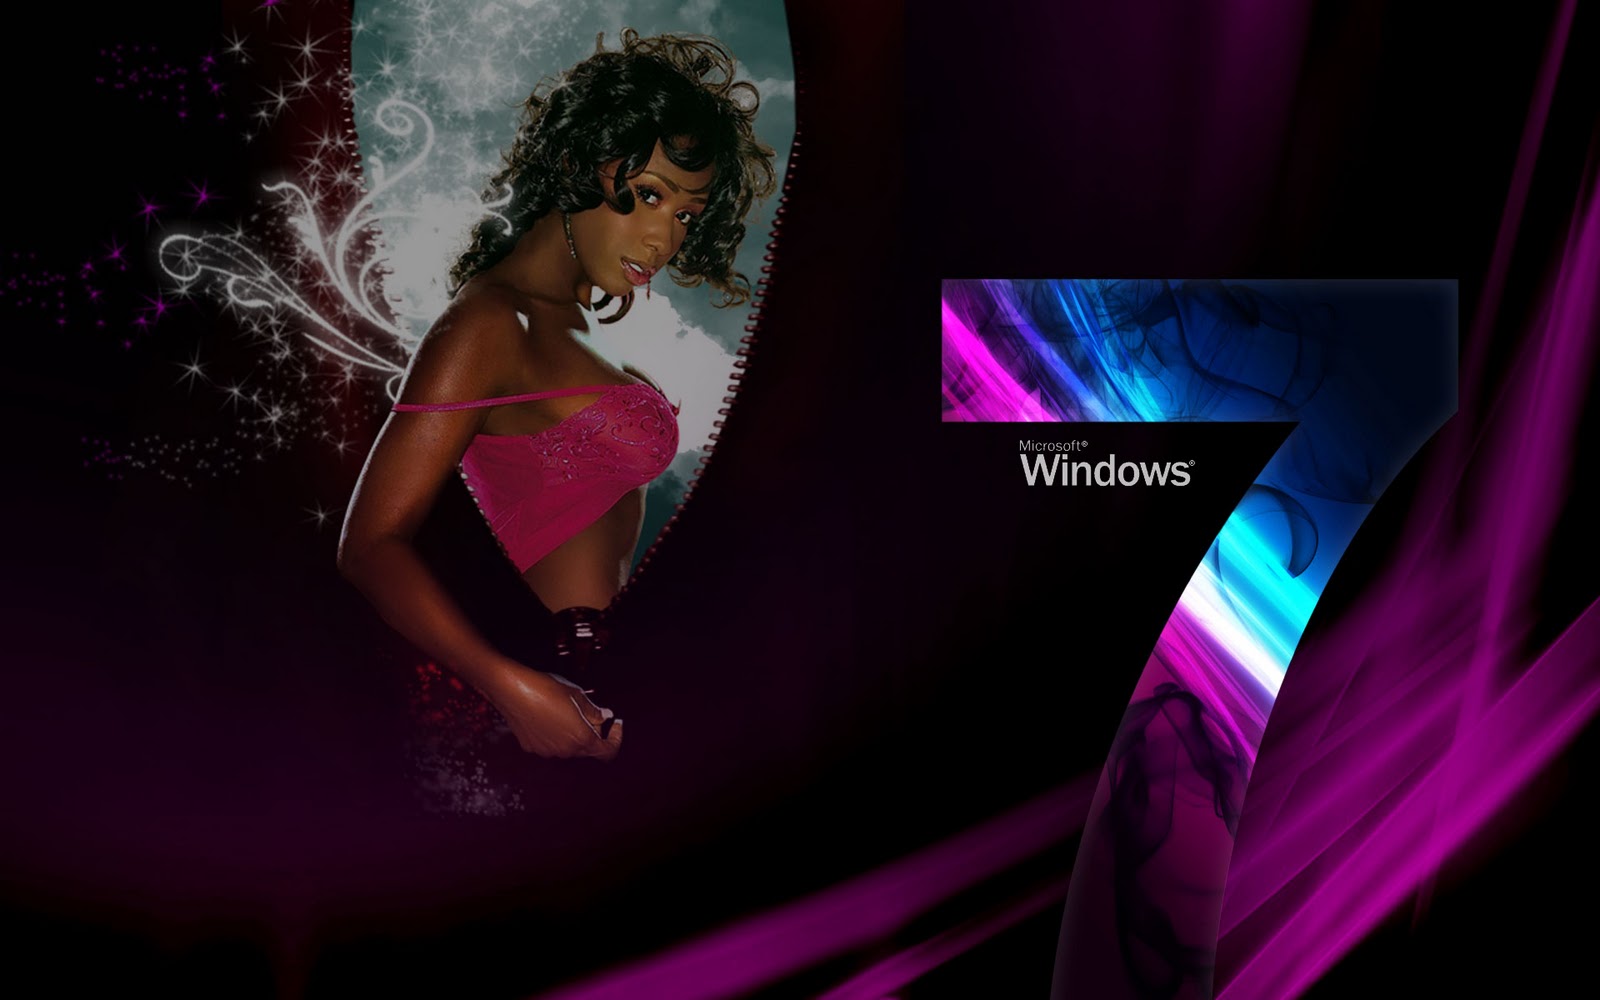  128kB Windows 7 animated wallpaper animated wallpaper funny animated